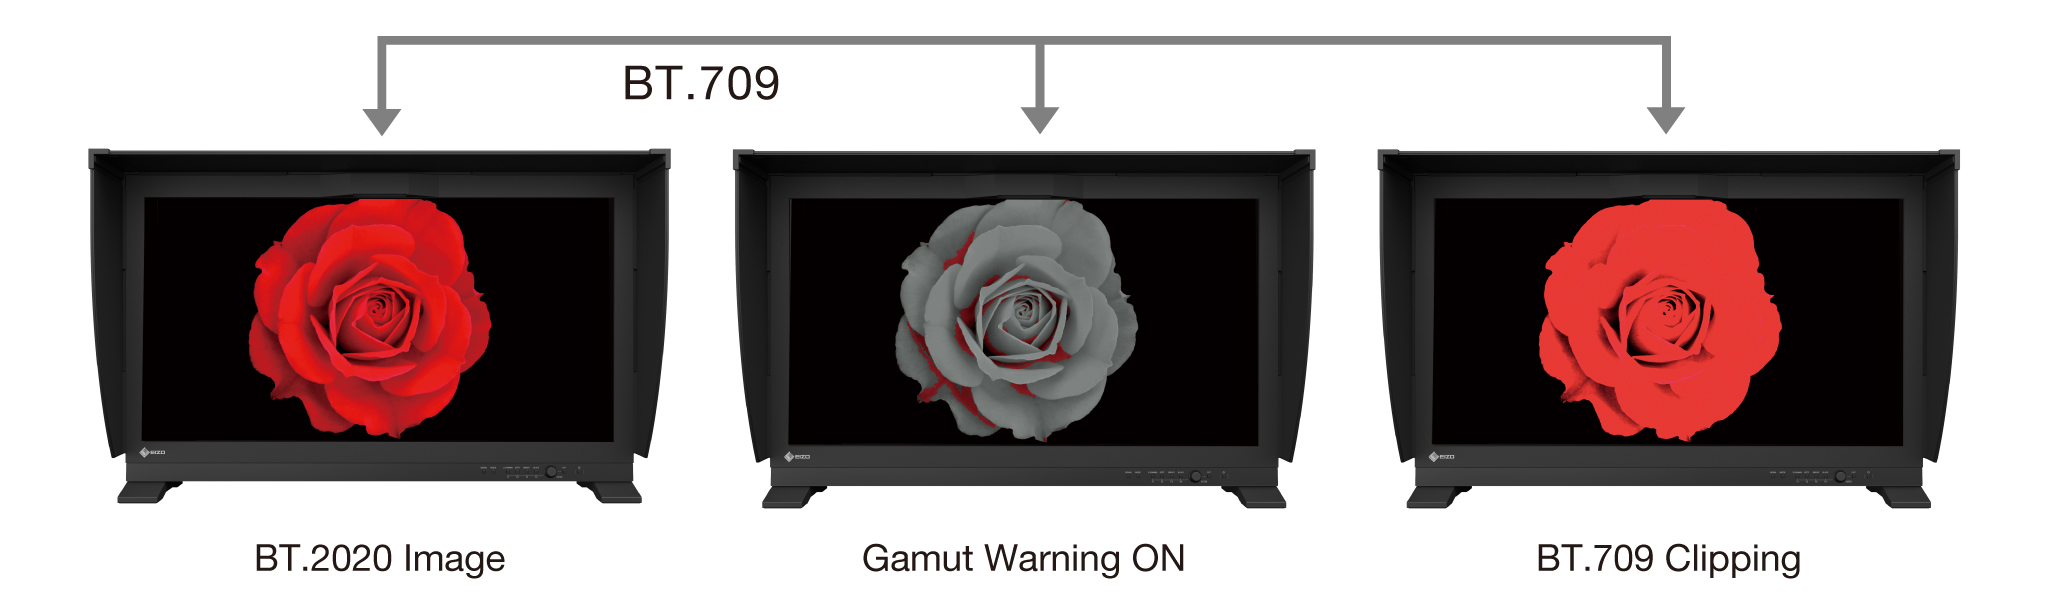  BT.709 Out of Gamut Warning